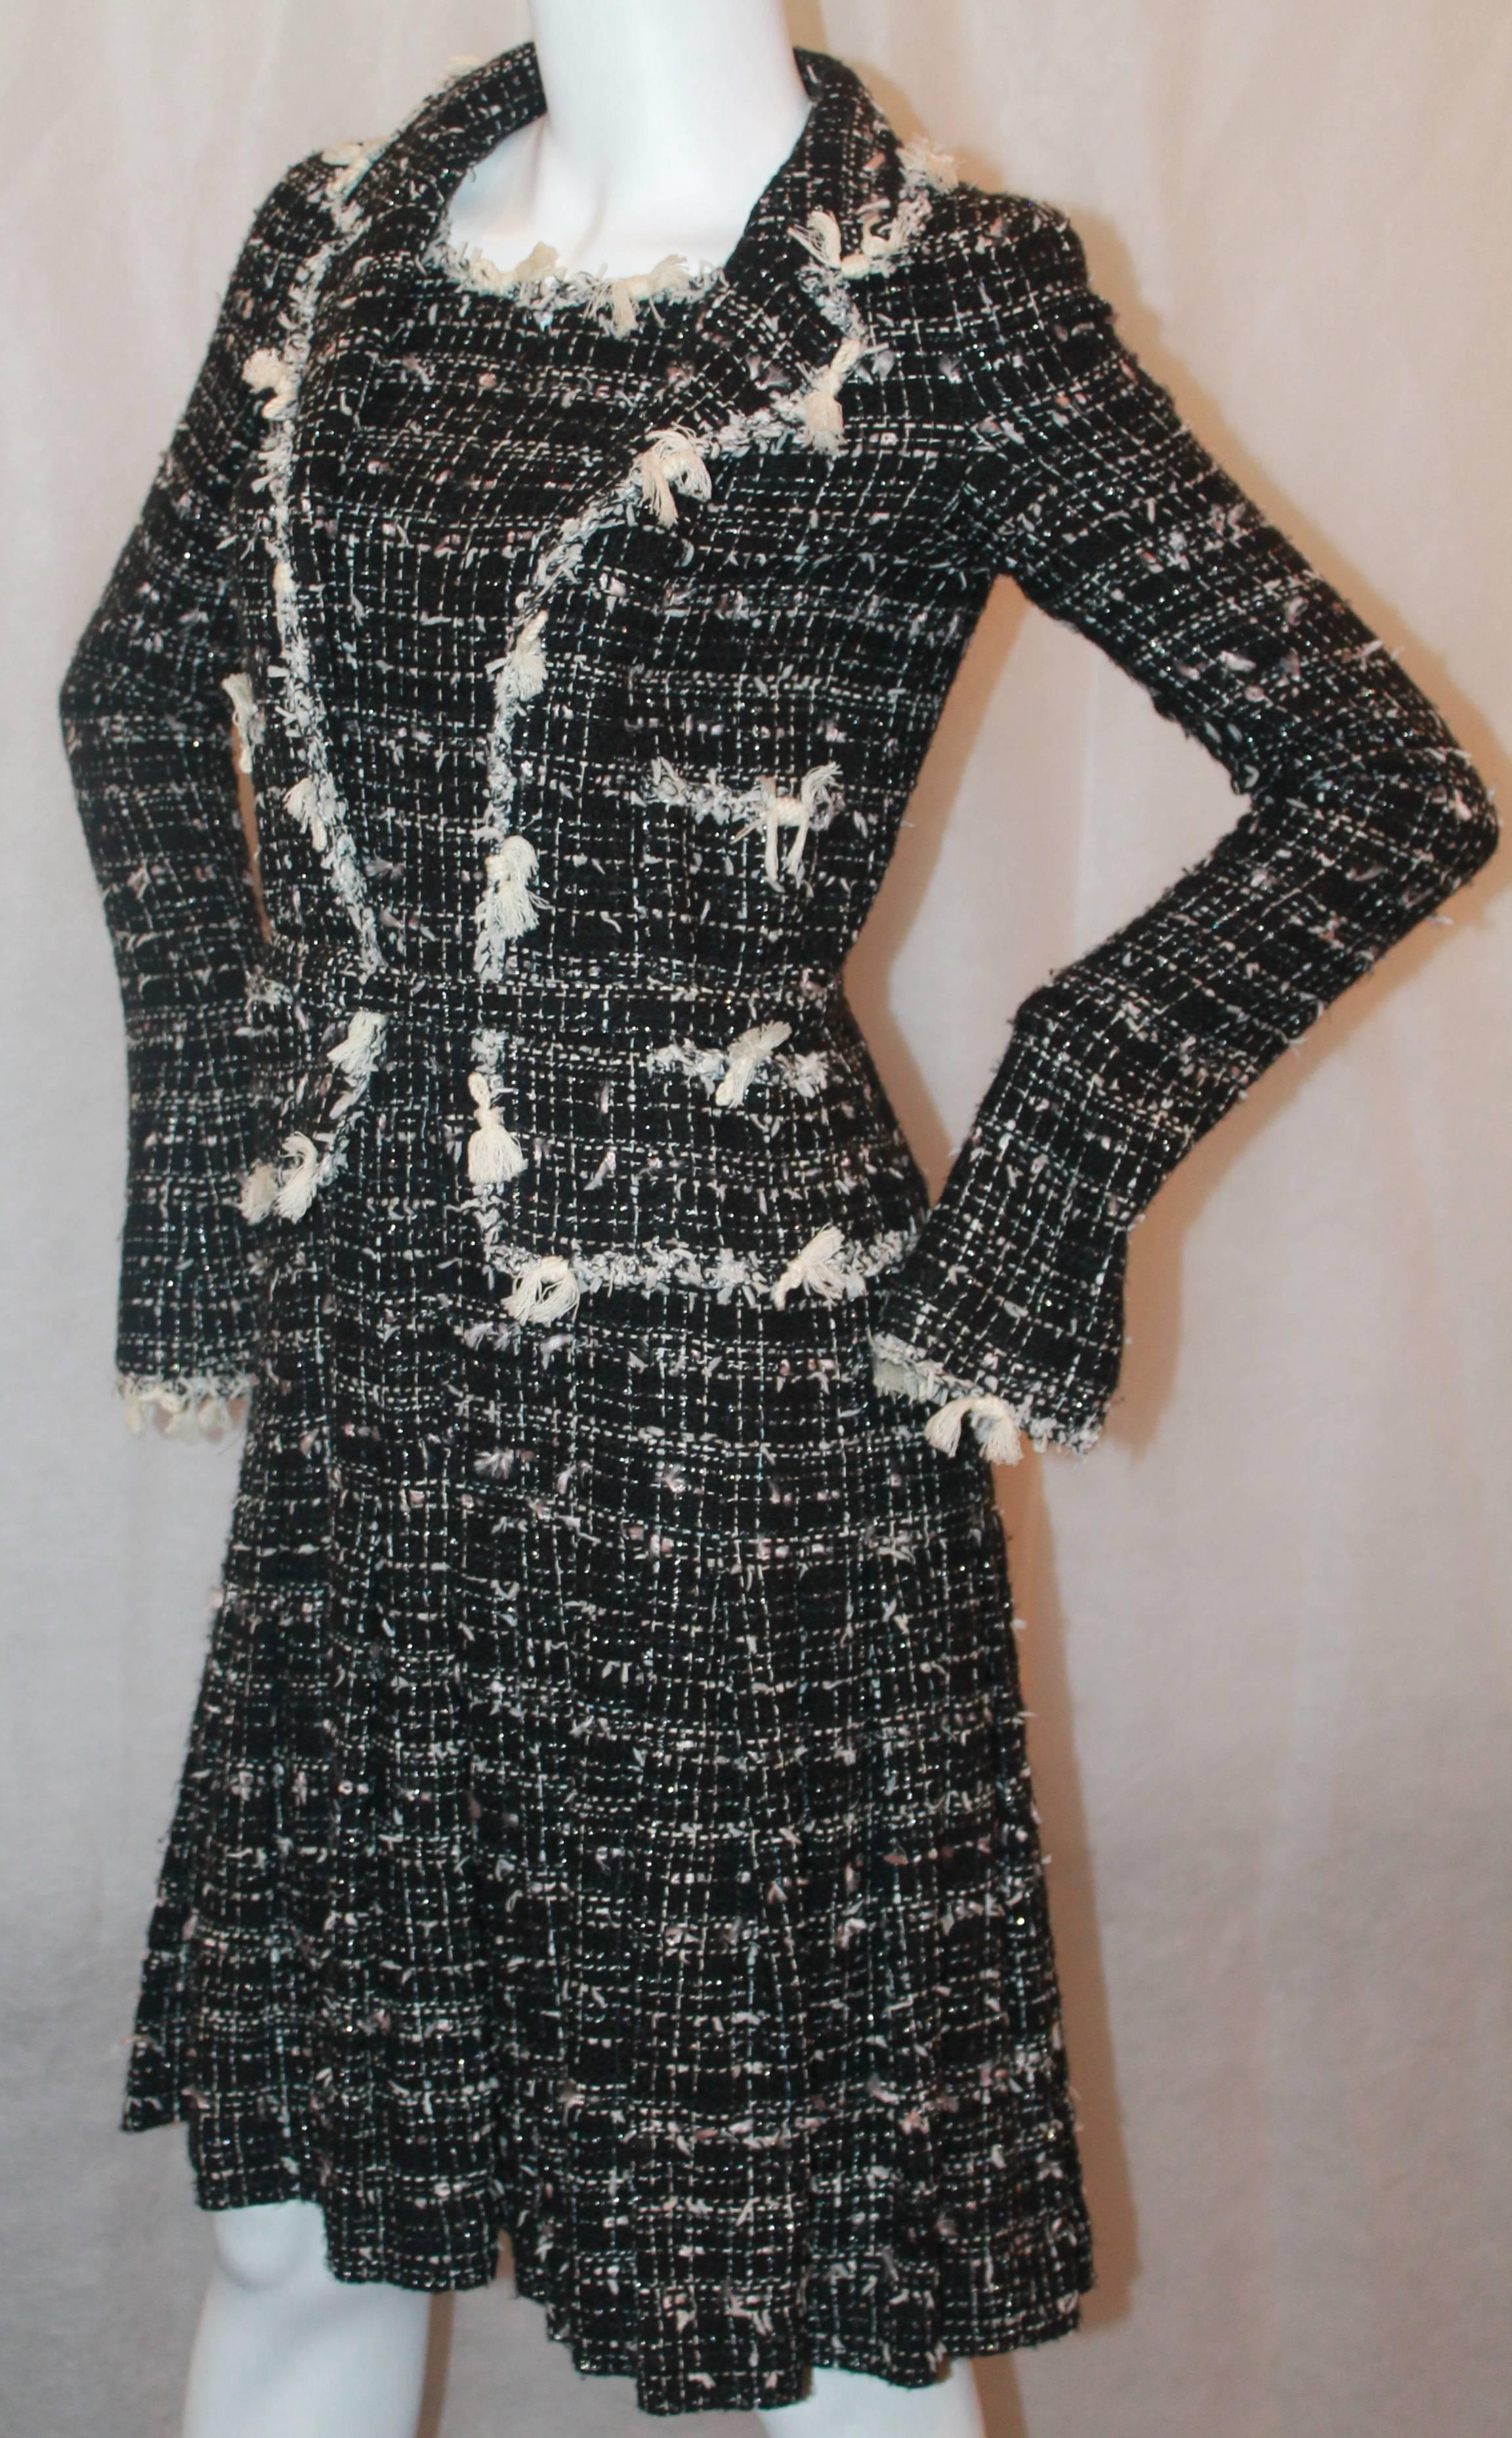 Chanel Black & Ivory Tweed Jacket Style Dress w/ Silver Metallic Stitching - 38 - Circa 05C  This dress gives the illusion that you are wearing a dress with a jacket ensemble. It is in excellent condition.  It features an ivory tassel trim, a